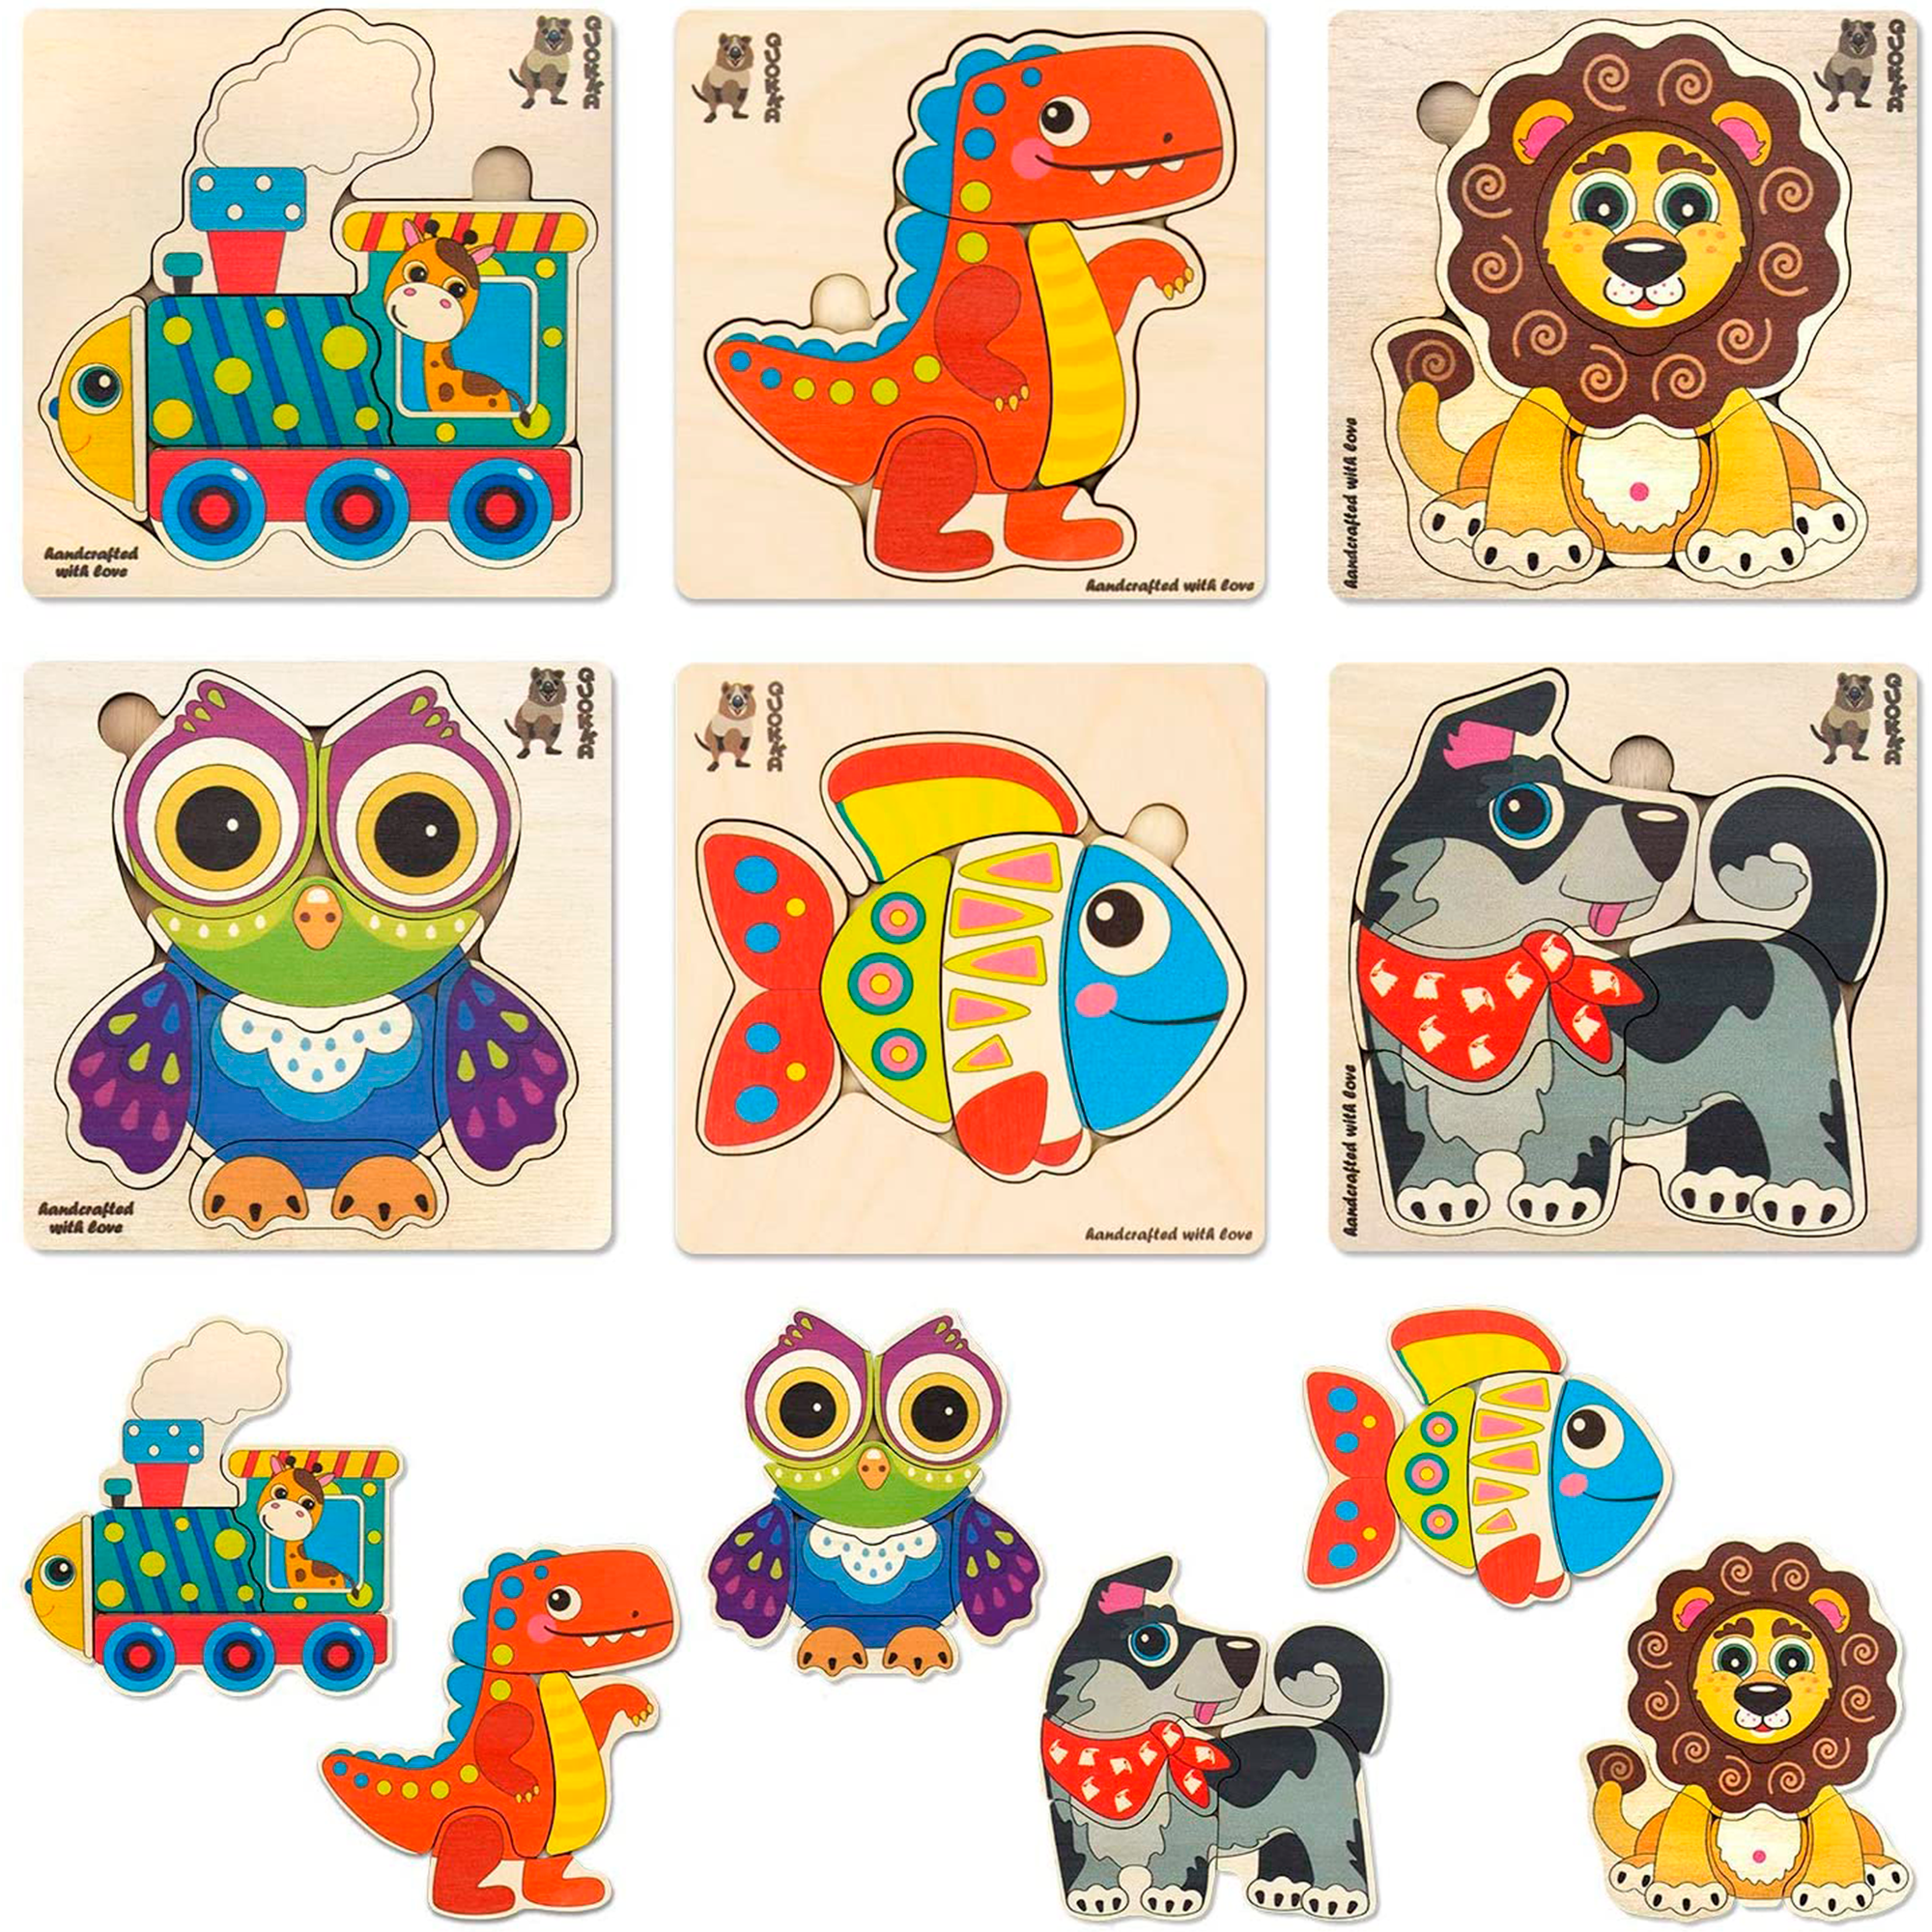 Toddler Preschool Game/Toy Wooden Educational Toddler Jigsaw Puzzle 